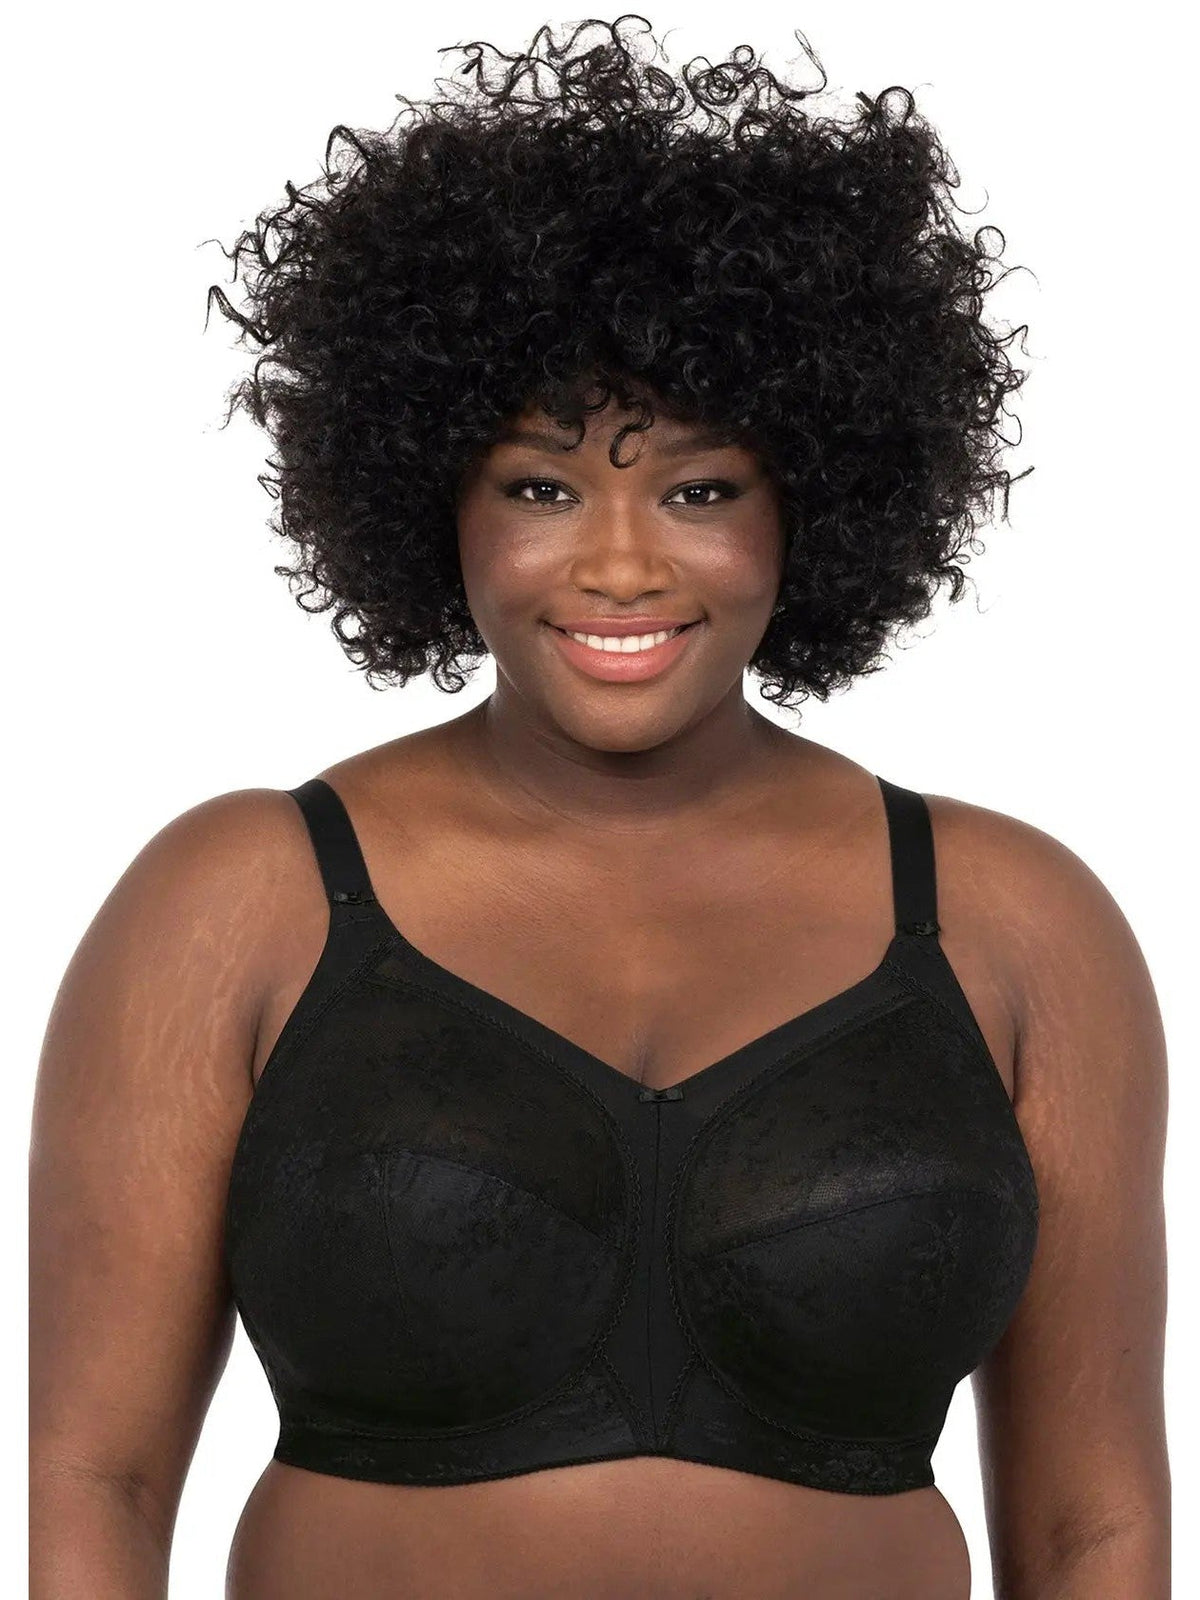 Fit Fully Yours Tiffany Wireless Bra Soft Nude